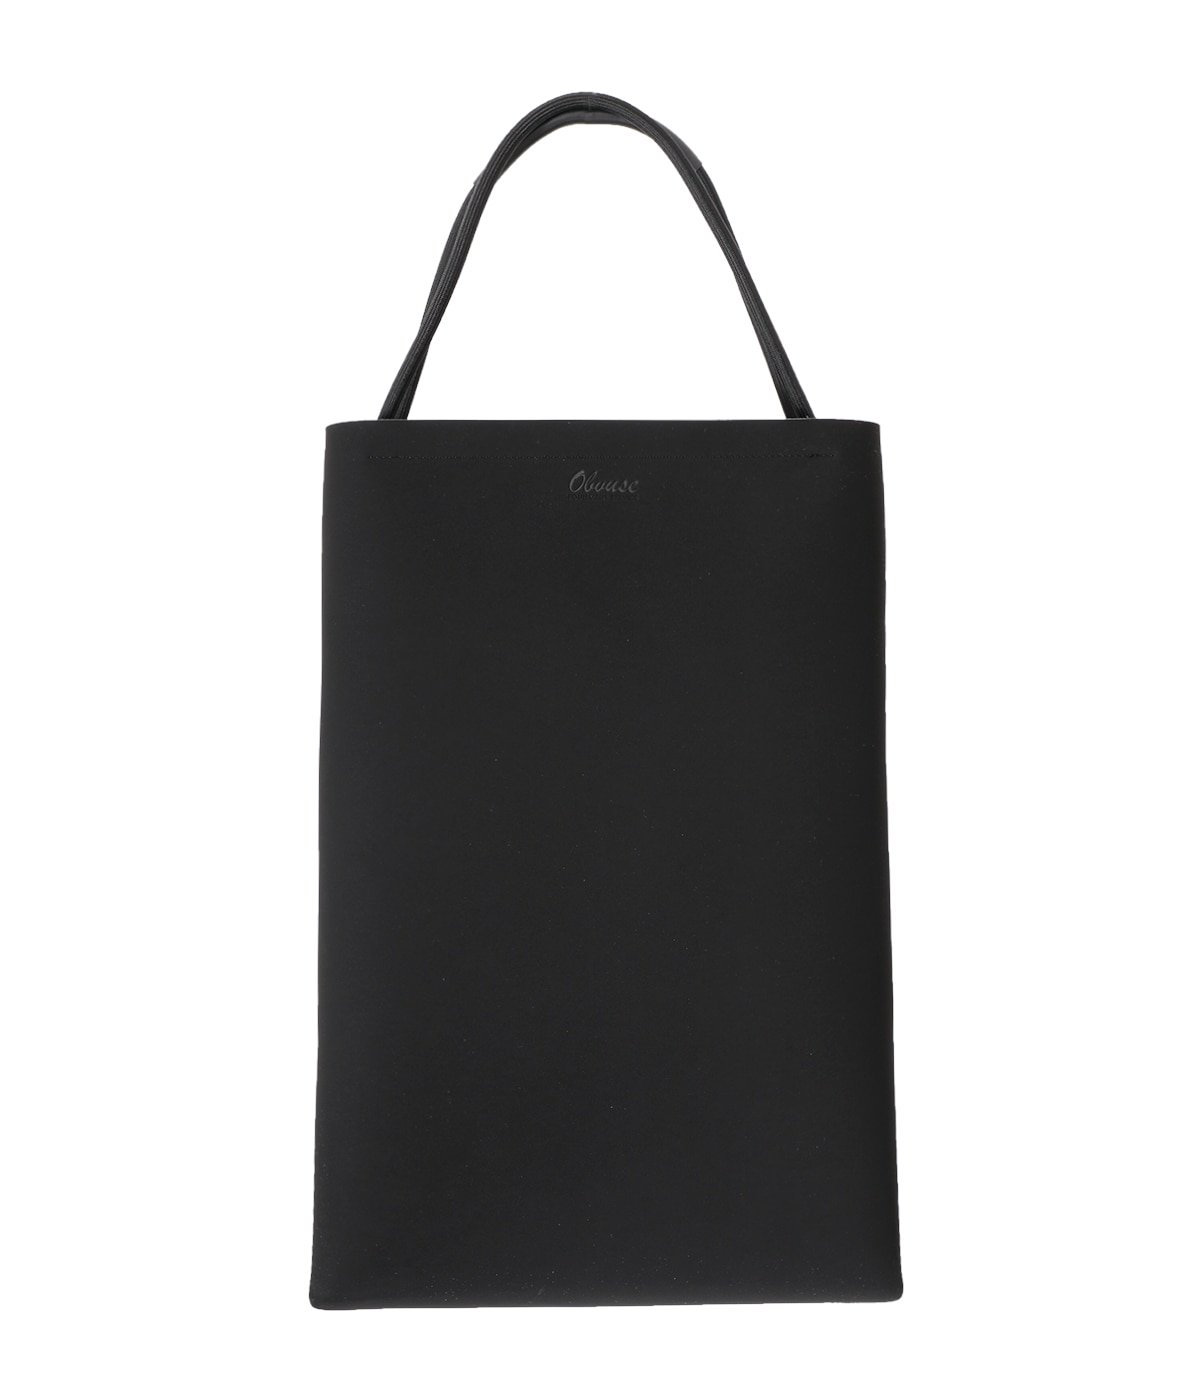 GUM LEATHER TOTE L | Obvuse(オビューズ) / バッグ トートバッグ